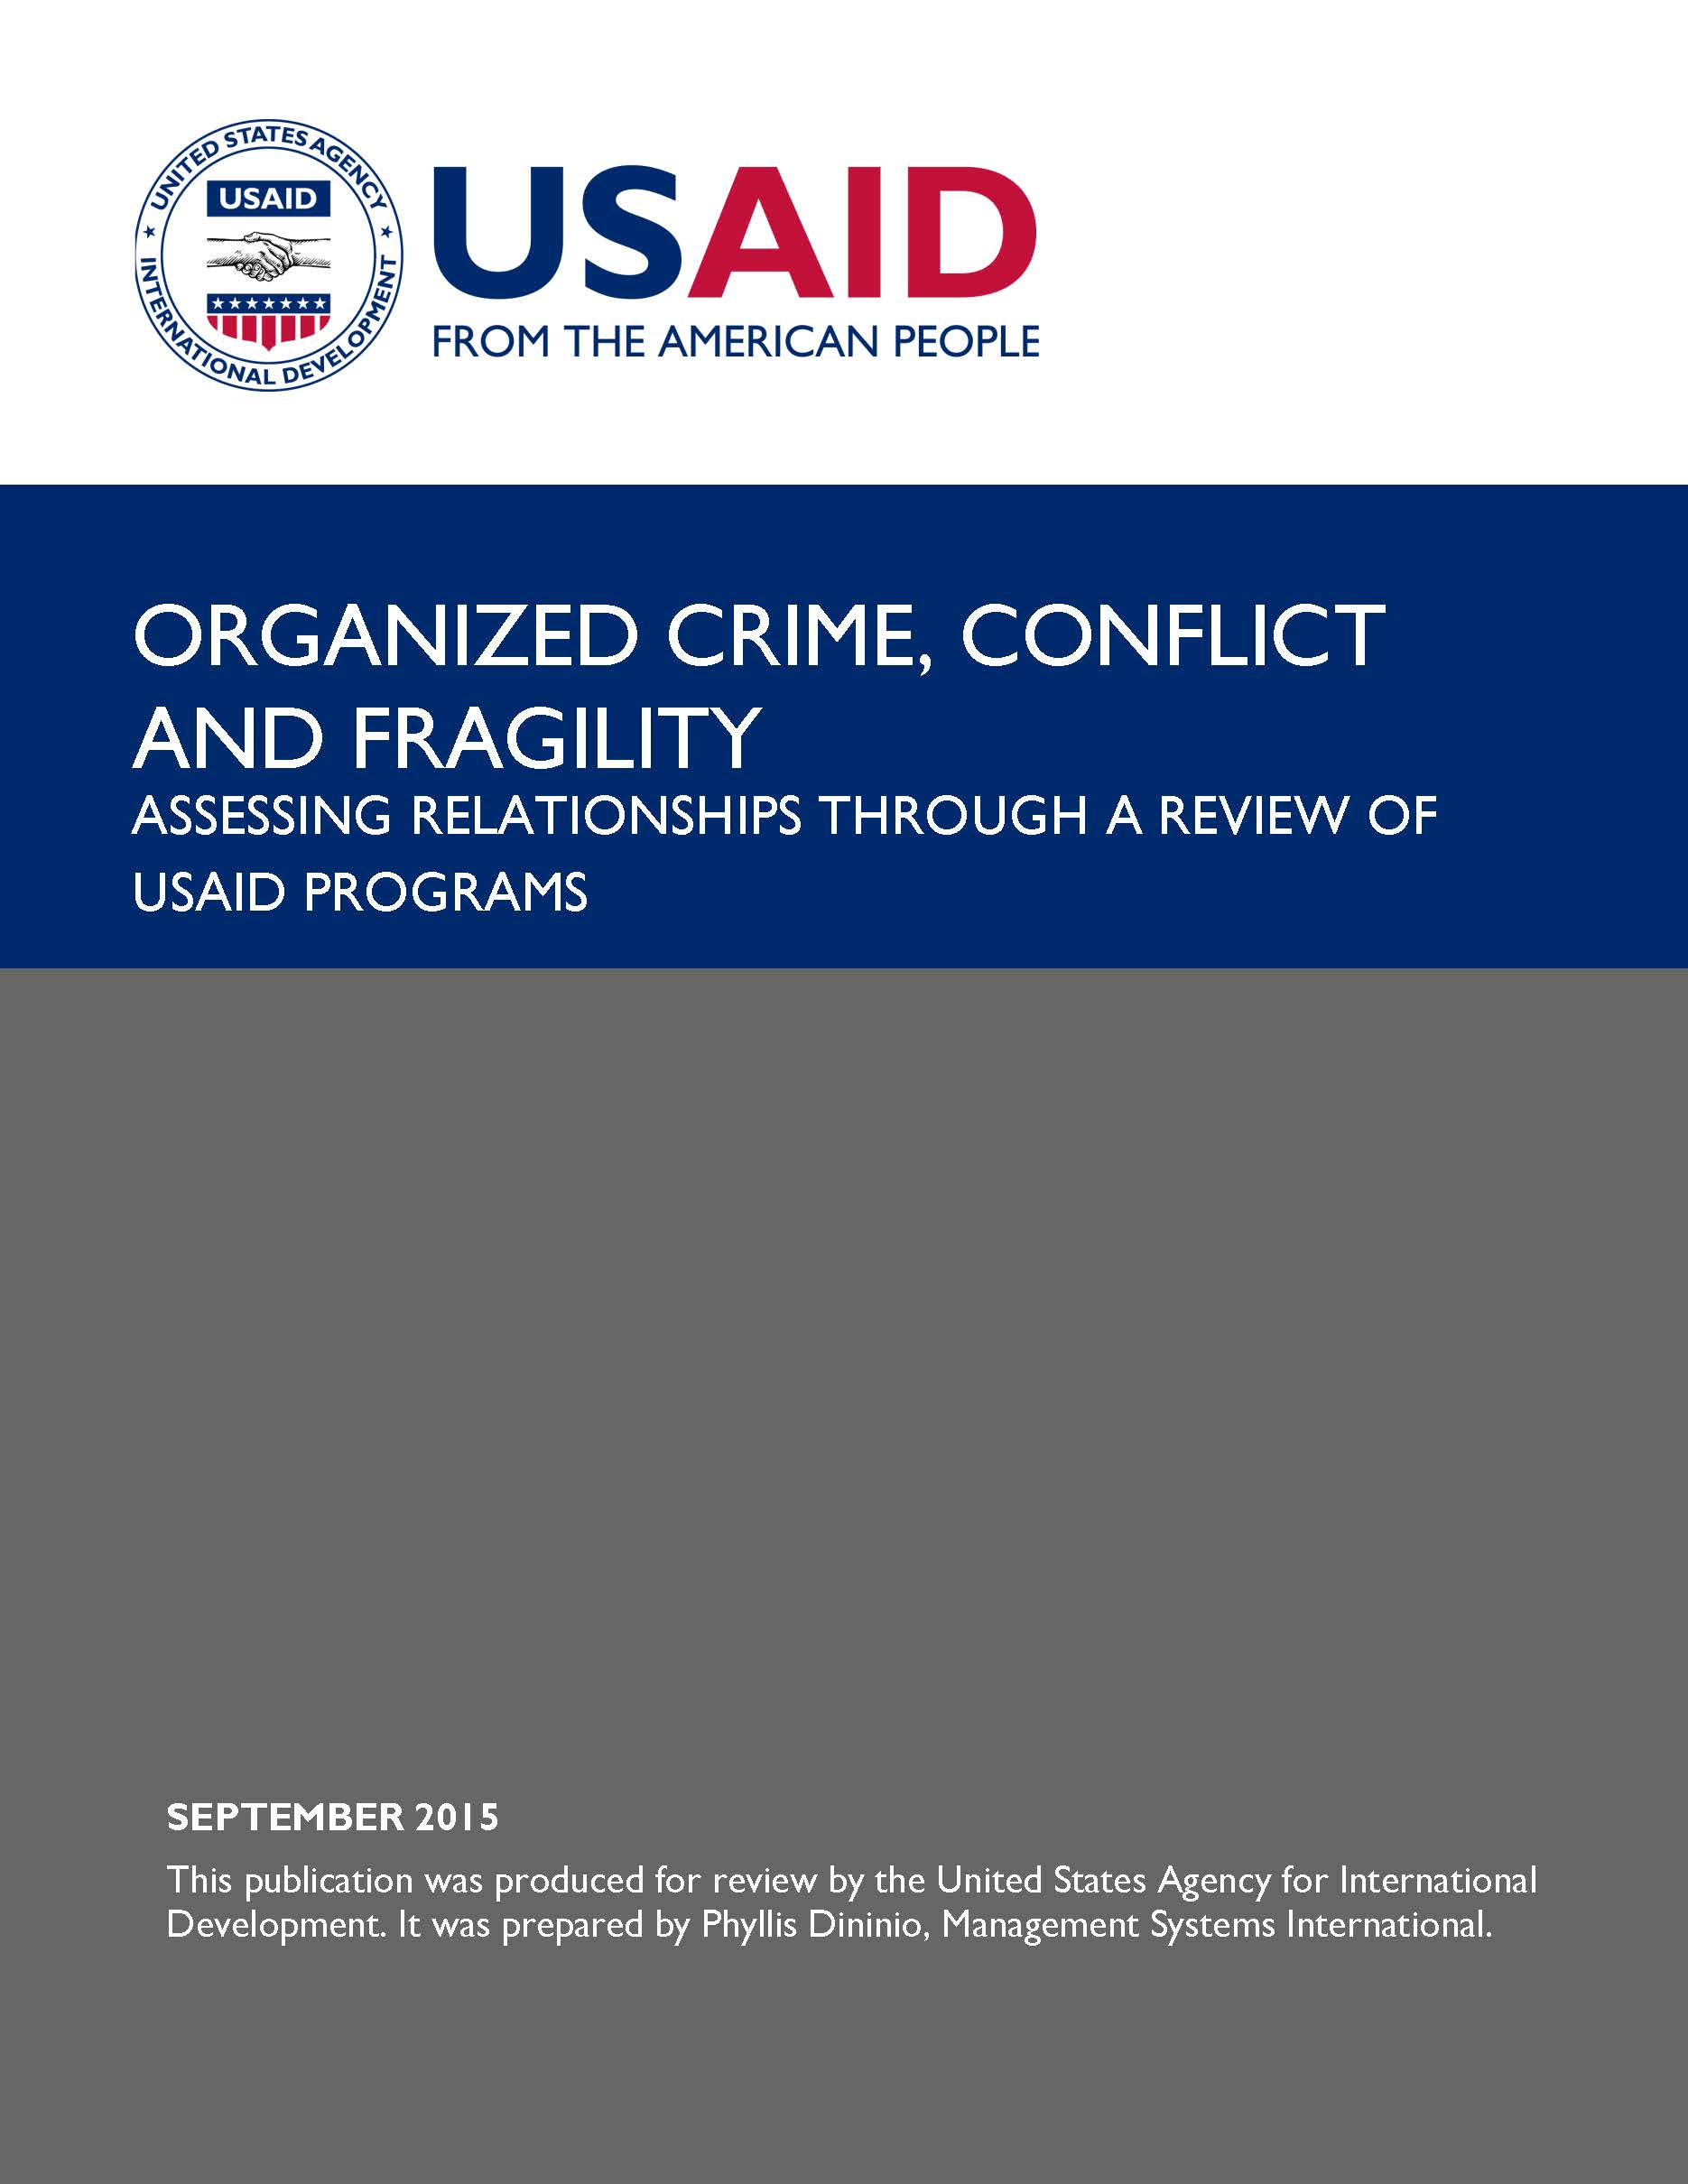 Organized Crime, Conflict and Fragility: Assessing Relationships Through a Review of USAID Programs